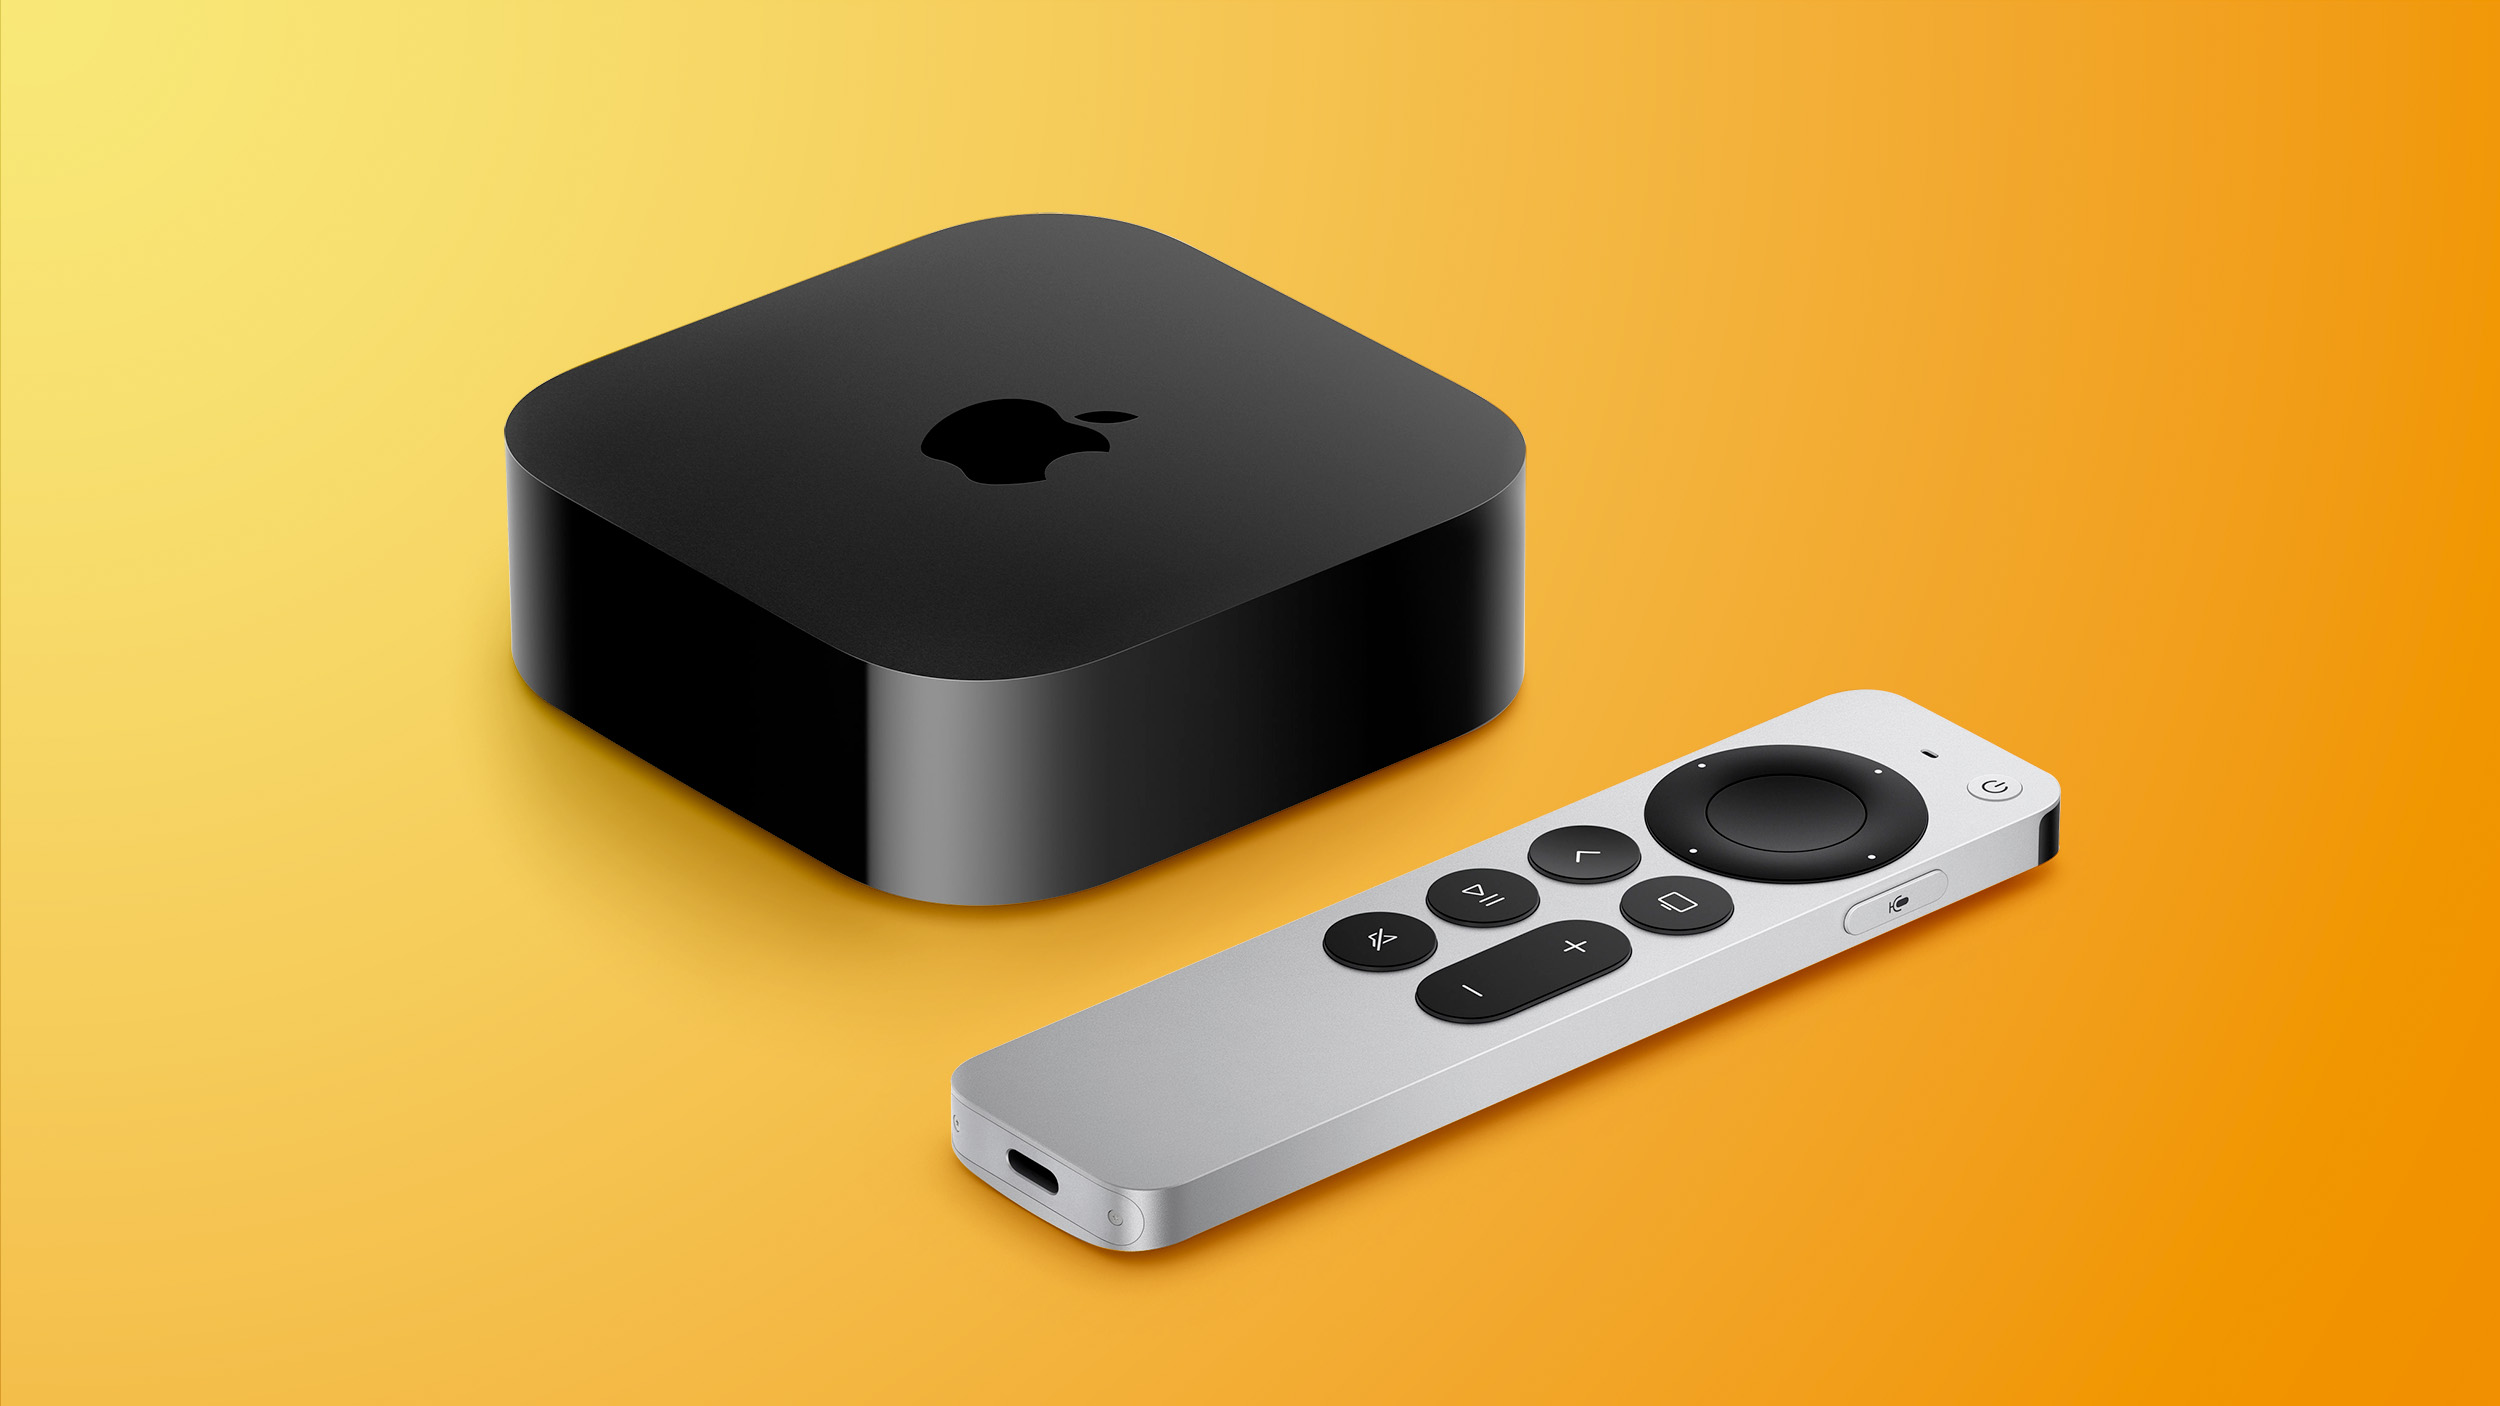 sympatisk Amorous Pelmel Apple TV: Should You Buy? Features, Reviews, and More